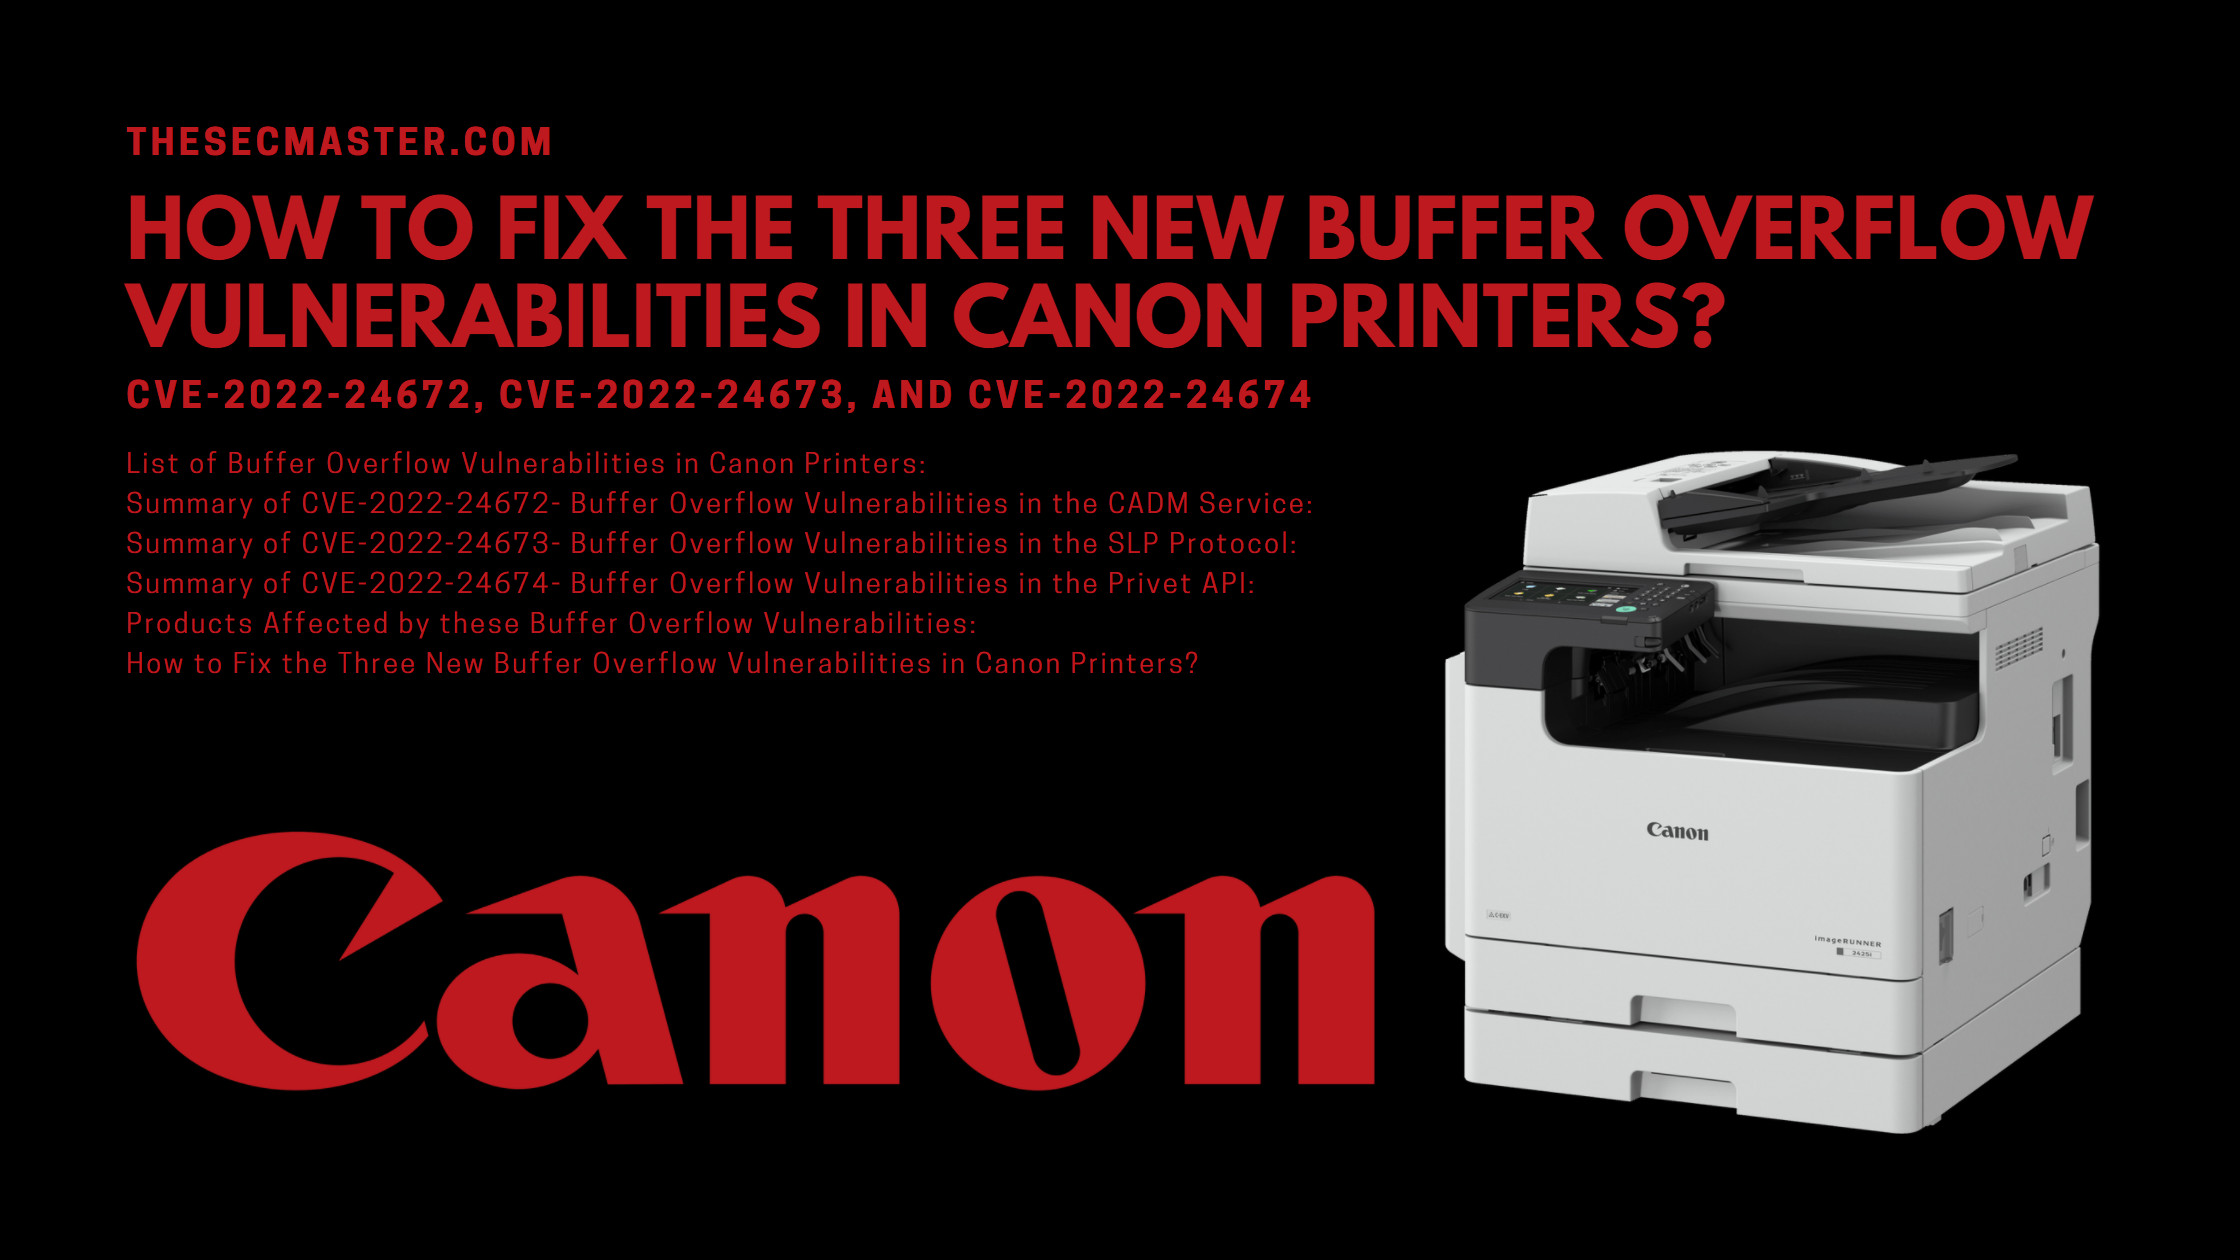 How To Fix The Three New Buffer Overflow Vulnerabilities In Canon Printers